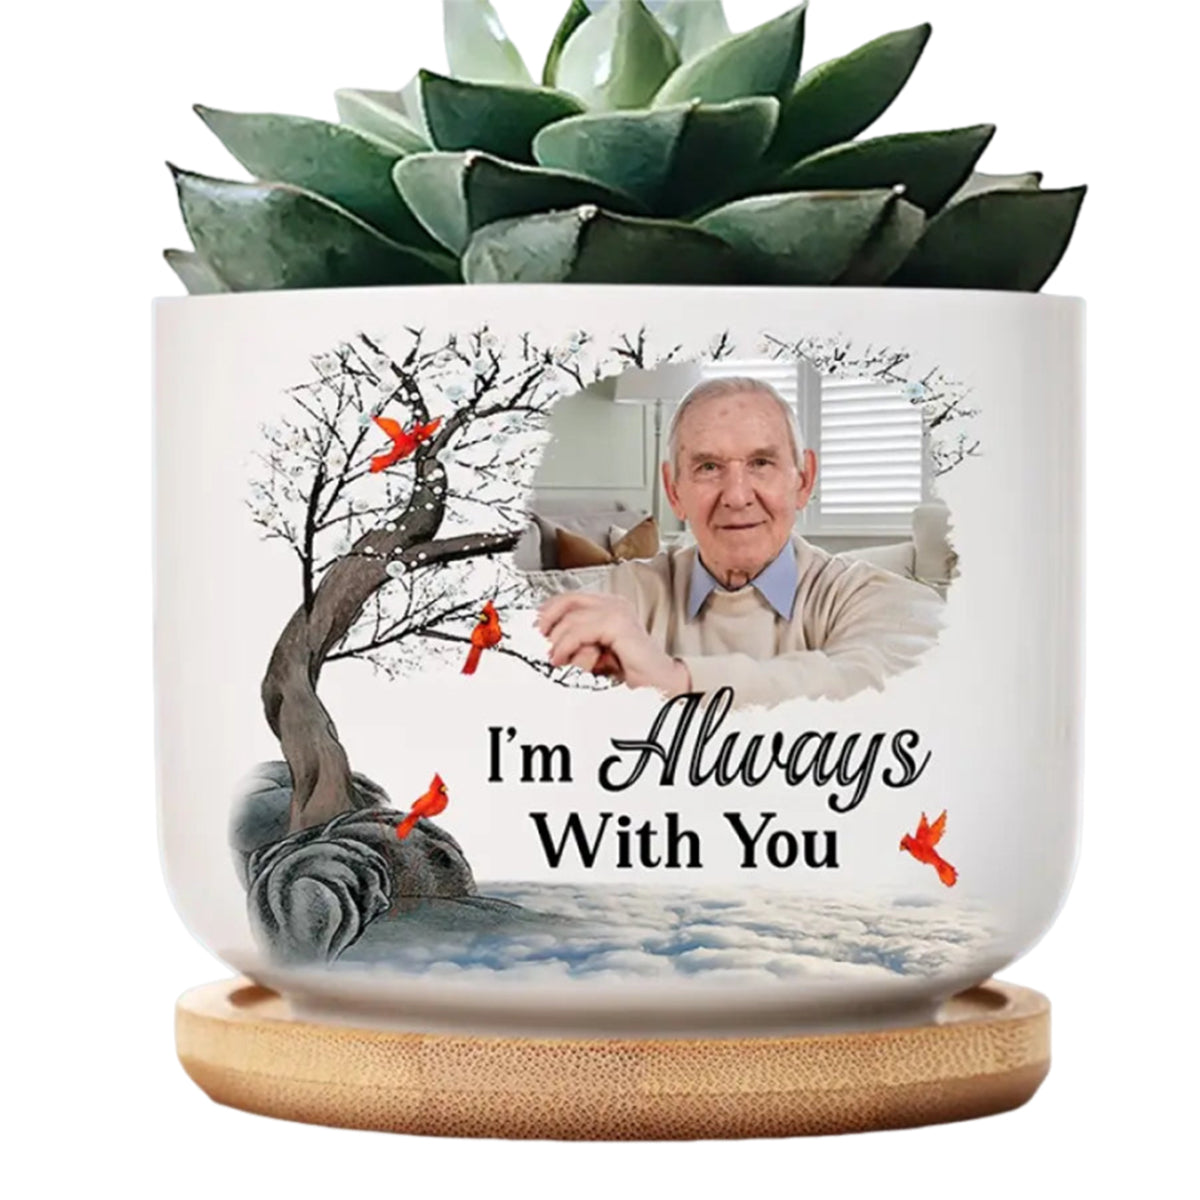 Not A Day Goes By That You Are Not Missed -  Personalized Memorial Ceramic Plant Pot